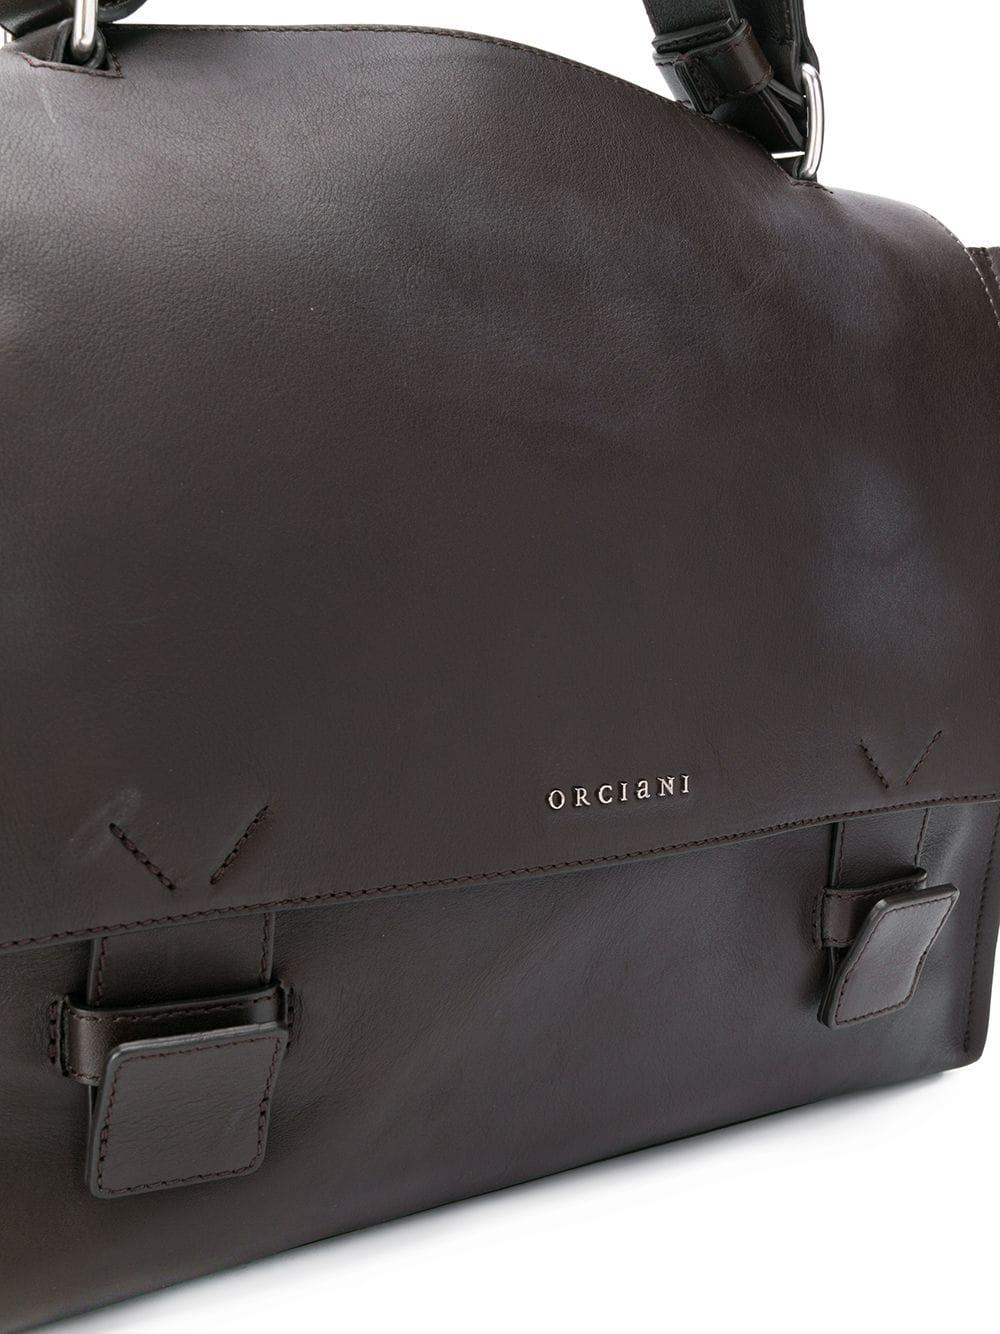 Orciani Leather Foldover Briefcase in Brown for Men - Lyst